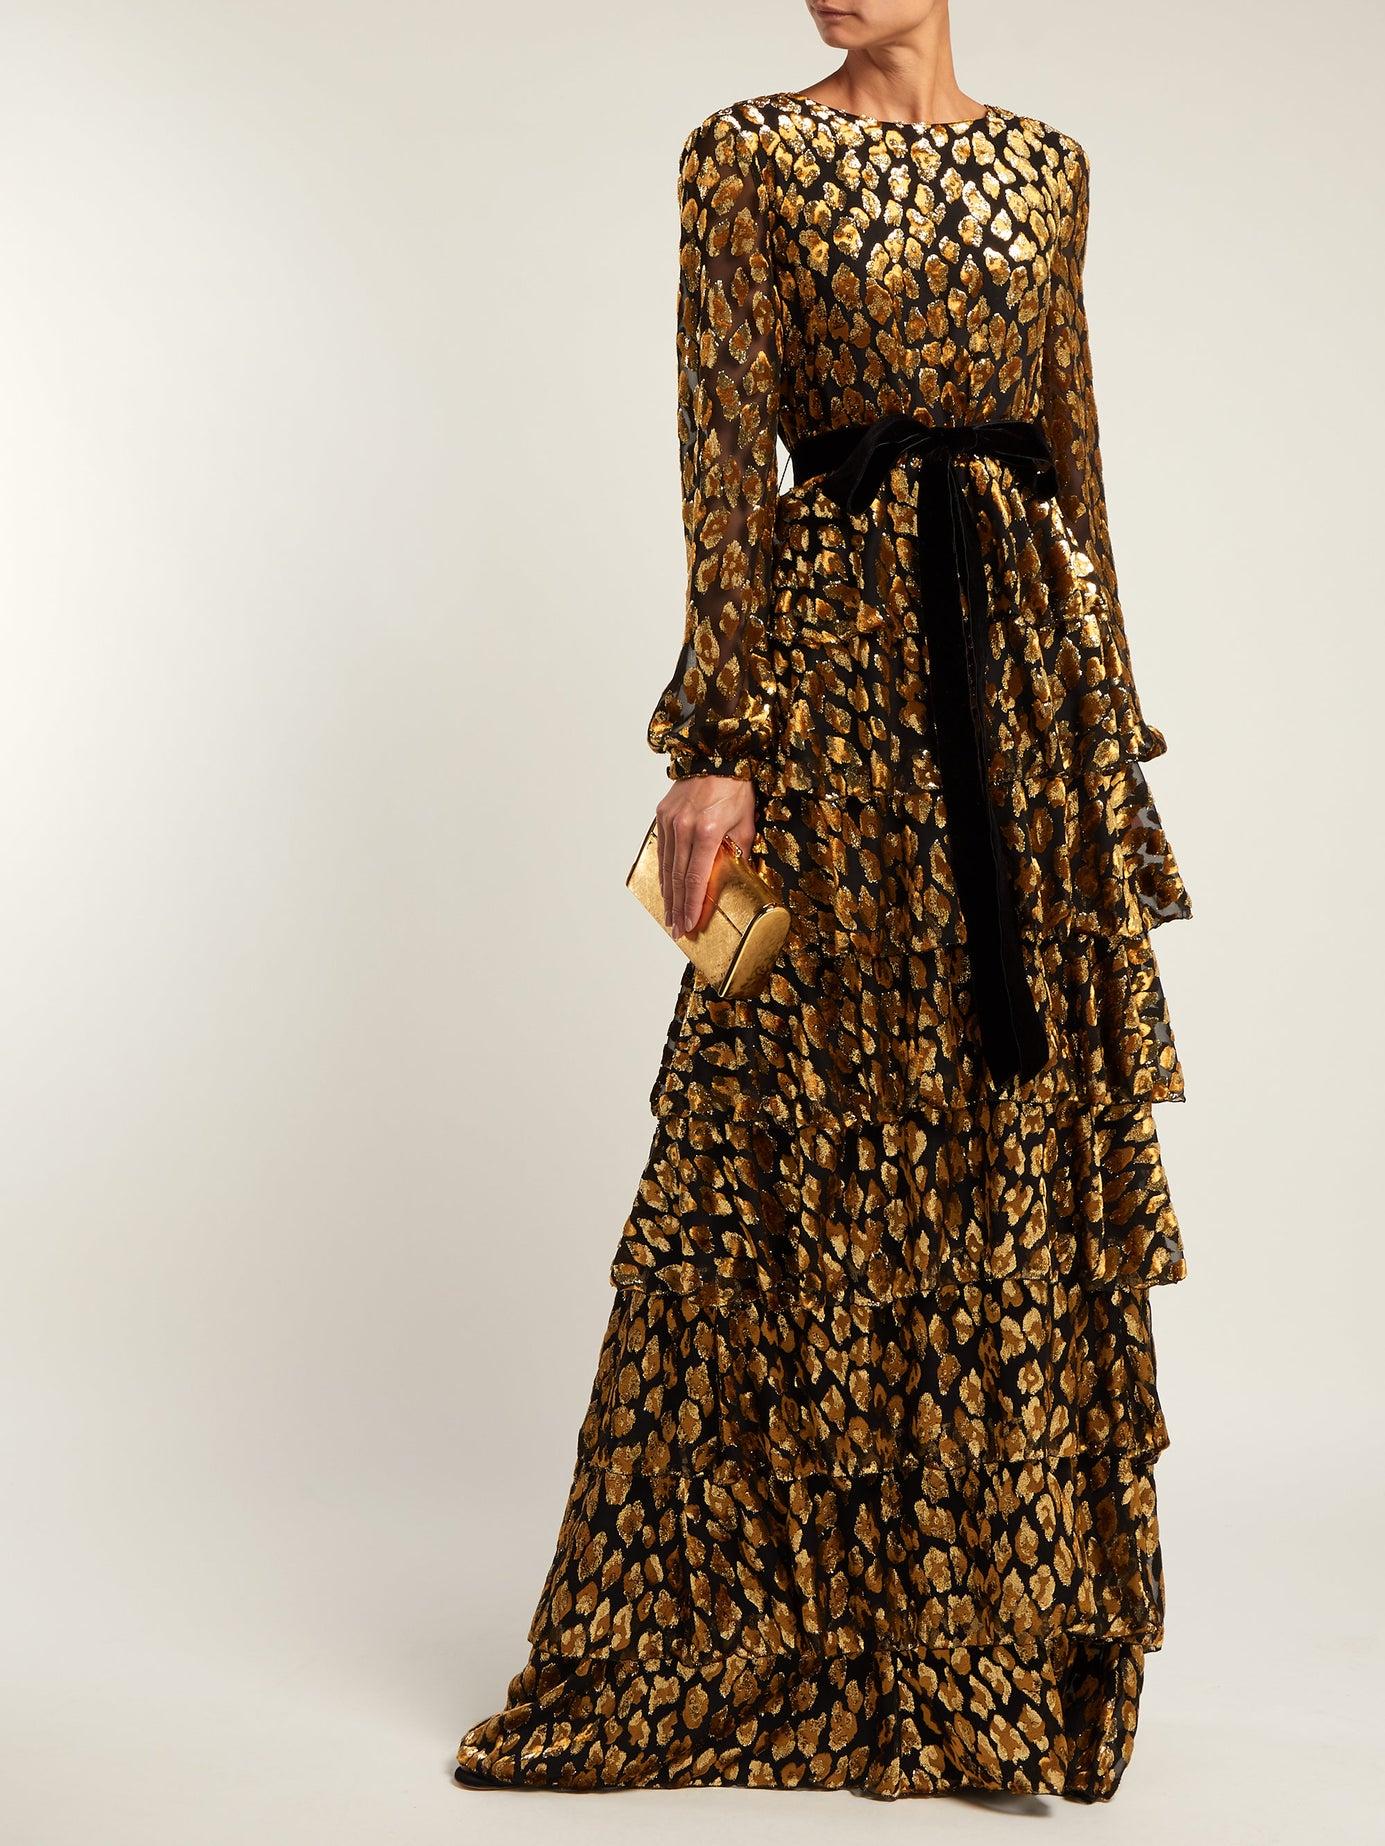 Valentino Tiered Leopard Fil-coupé Gown in Black Gold (Metallic) - Lyst